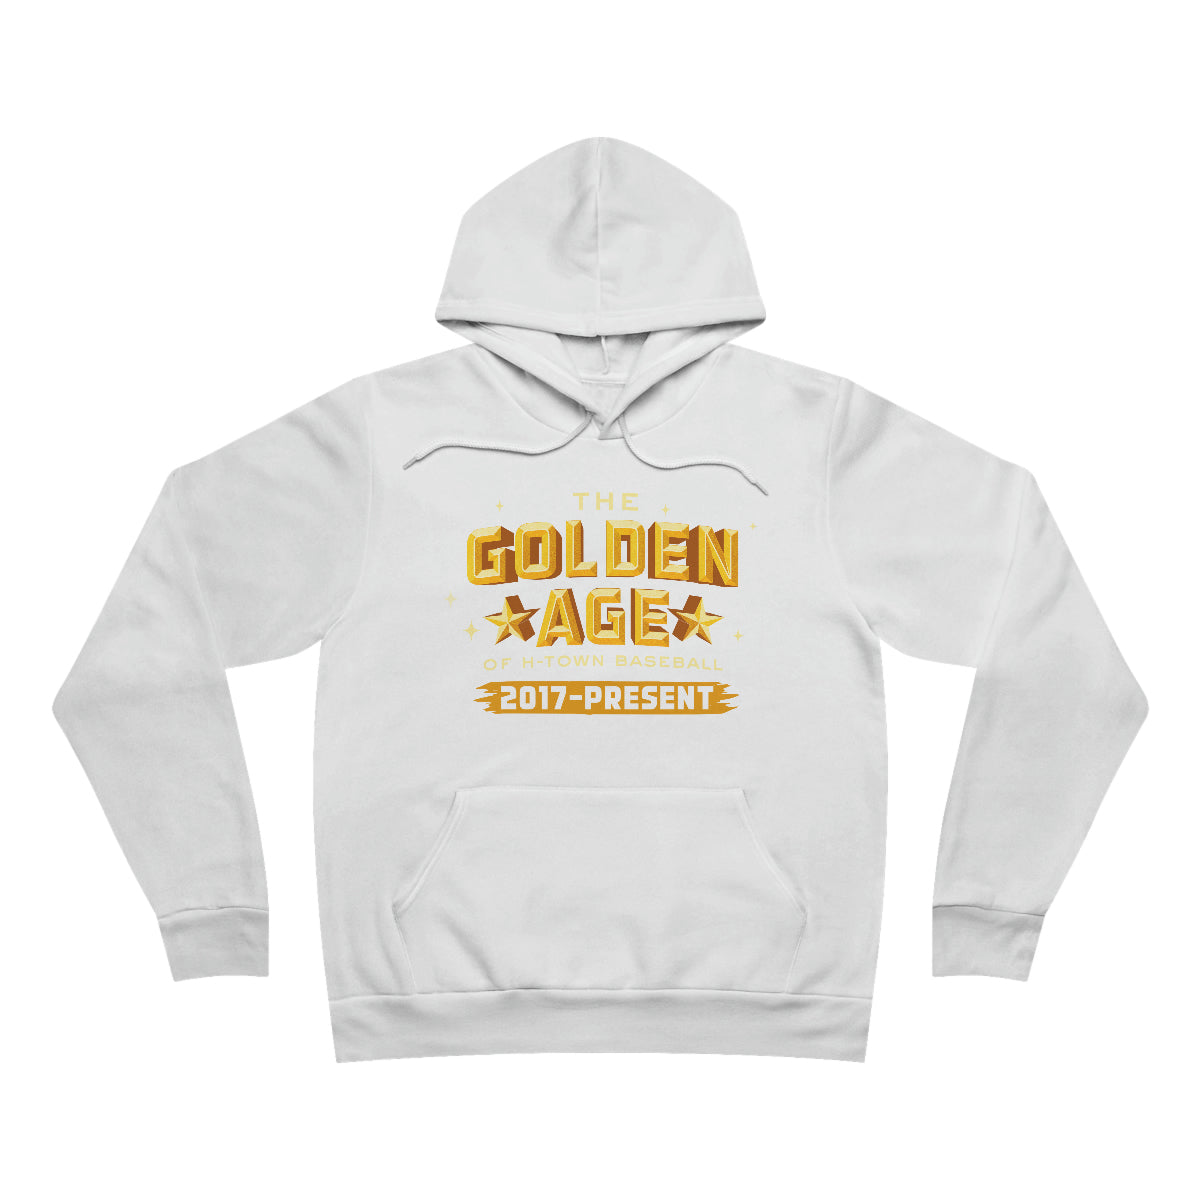 The Golden Age Pullover Hoodie